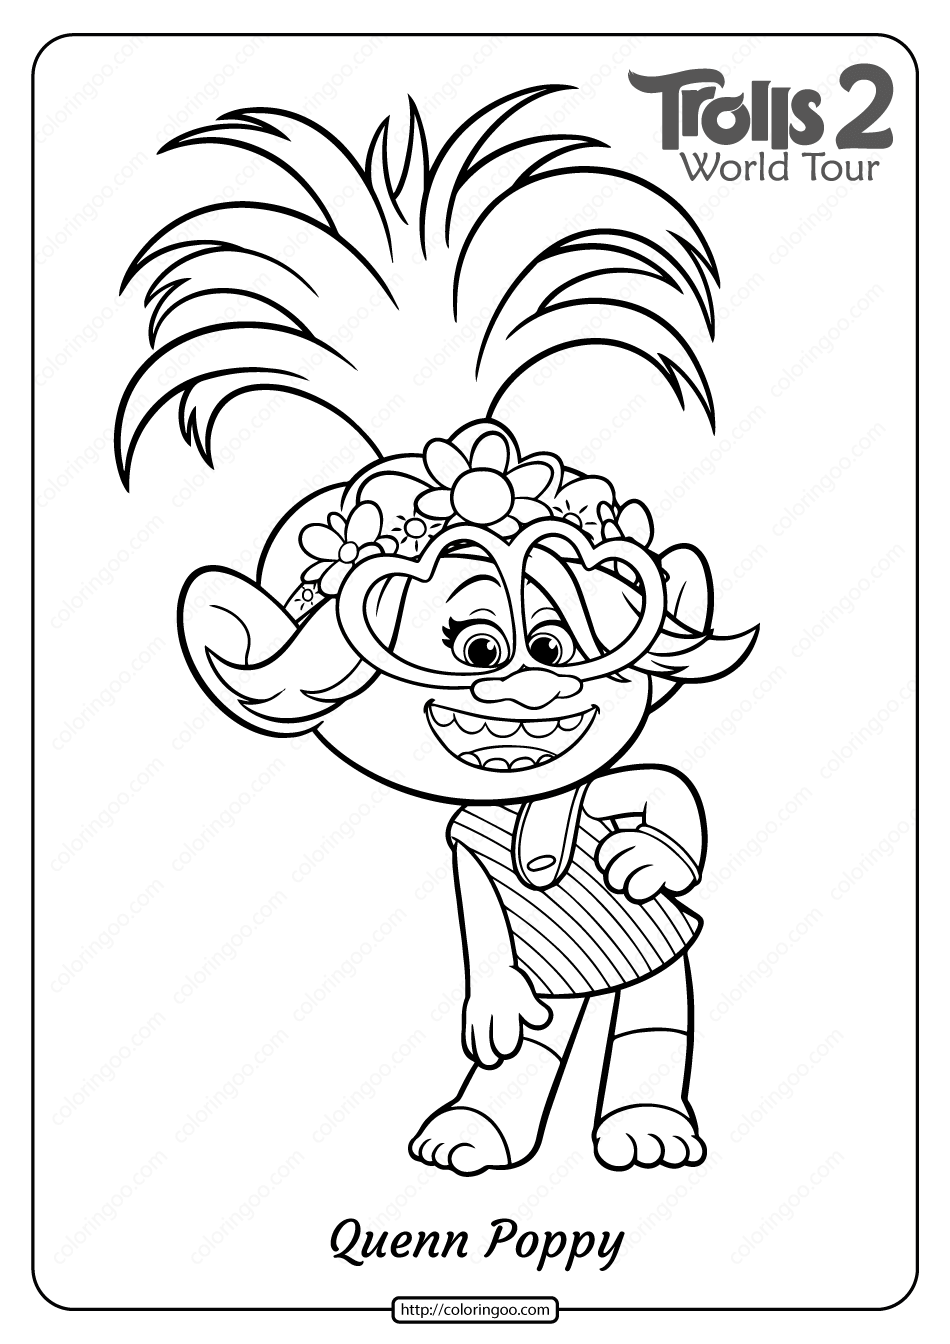 trolls-2-coloring-pages-coloring-home